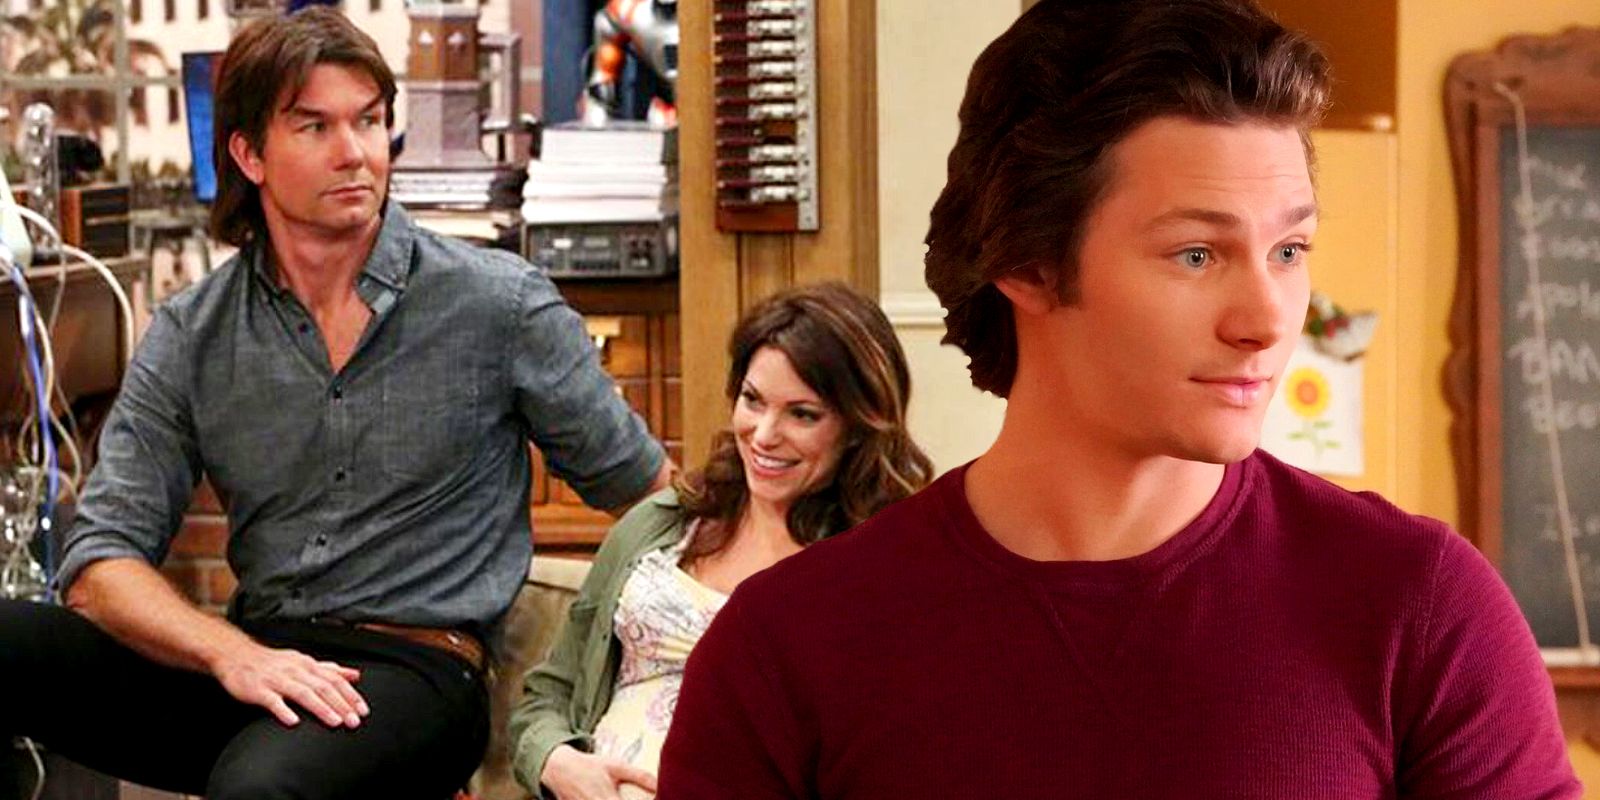 Jerry O'Connell as George Jr and Courtney Henggeler as Missy in the Big Bang Theory next to Montana Jordan as George in Young Sheldon